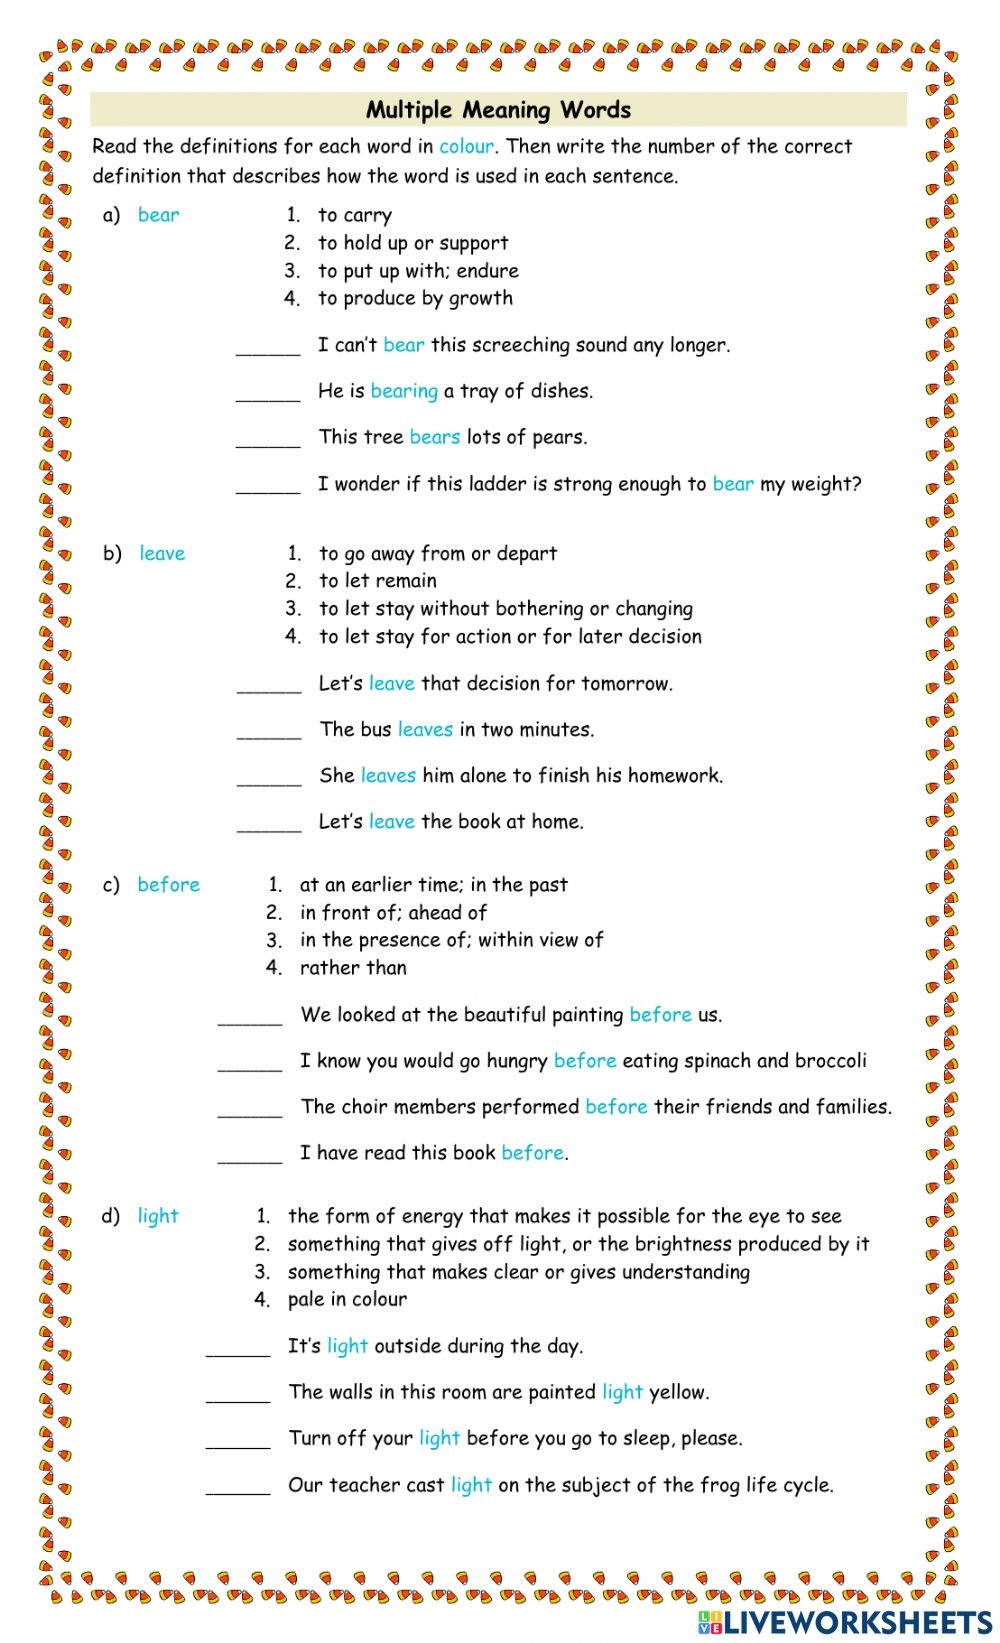 Multiple Meaning Words Worksheets 6th Grade Pdf